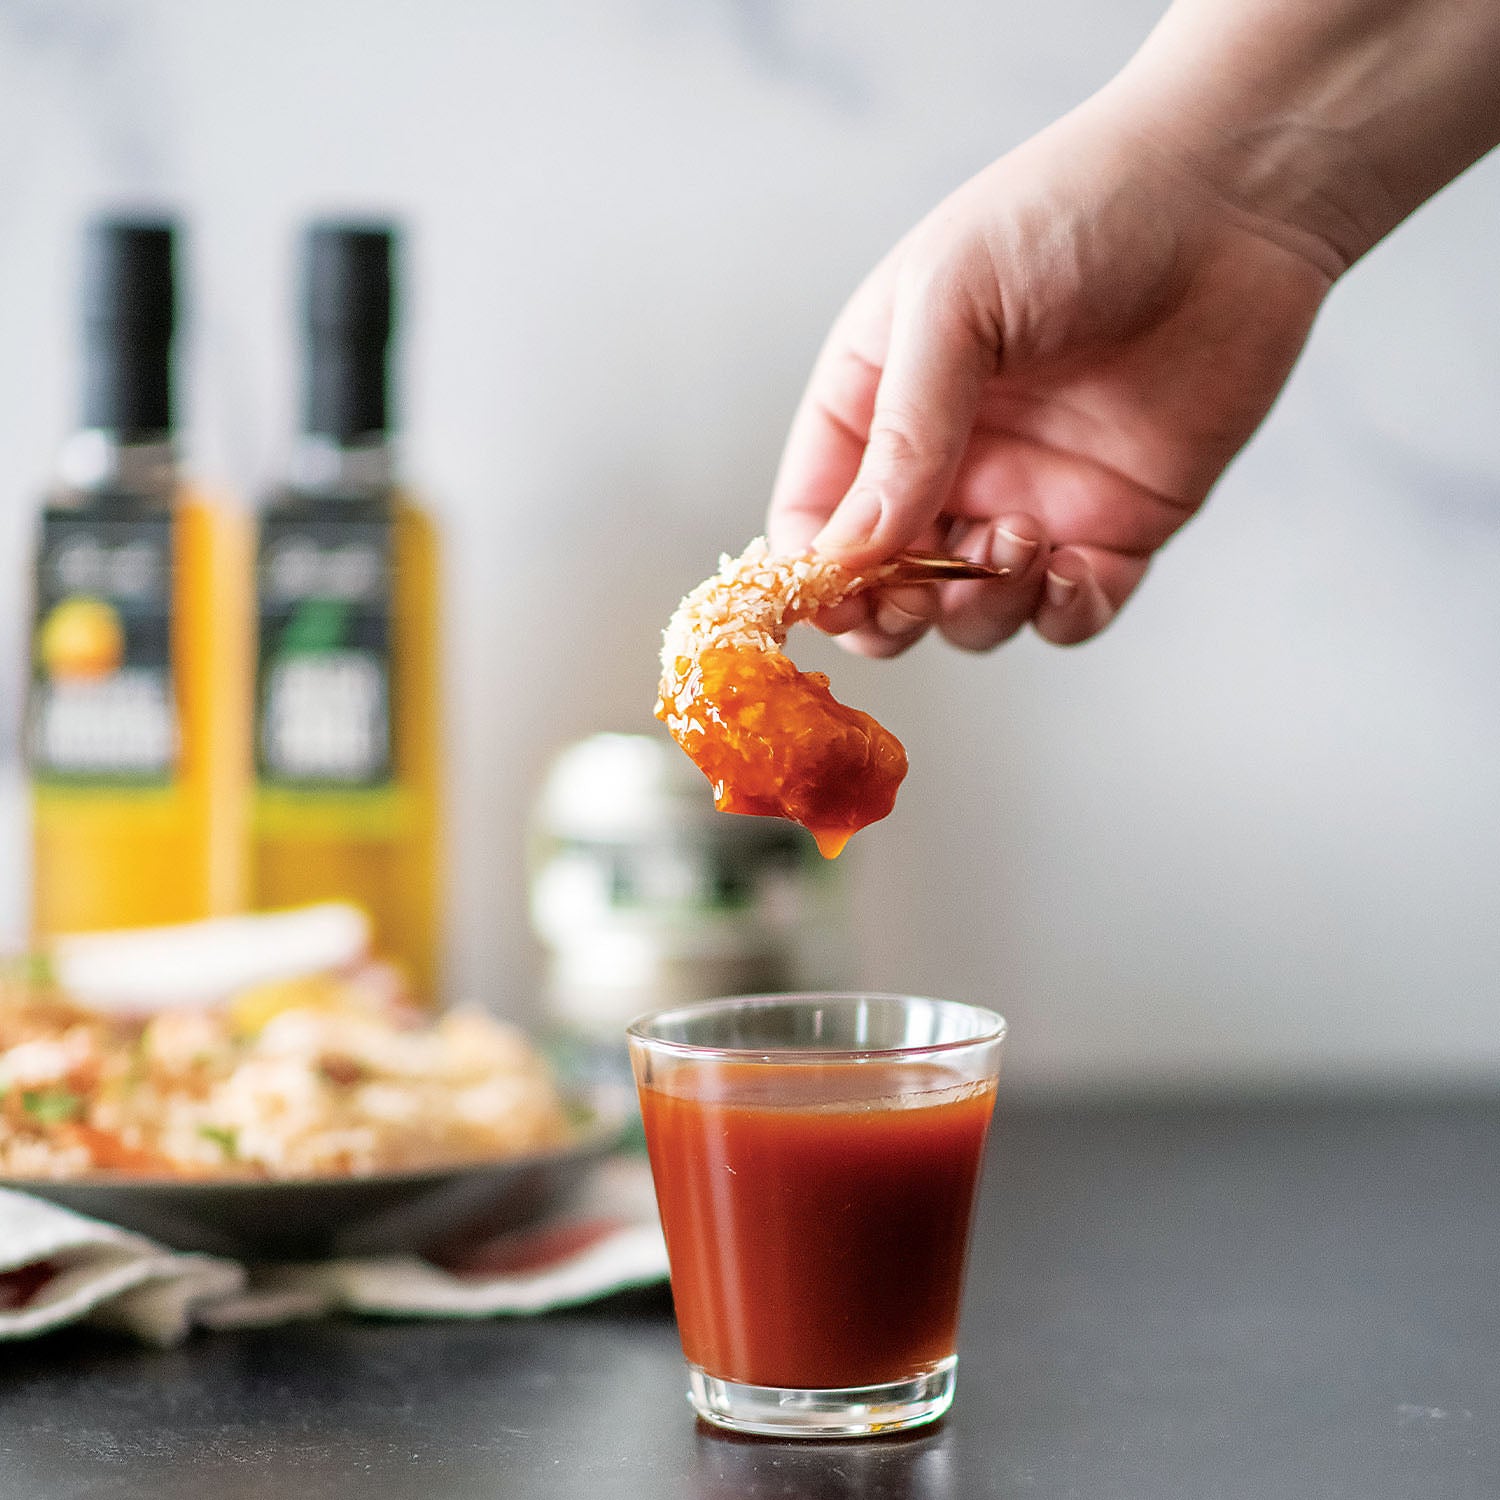 Coconut Shrimp with Sweet Chili Dipping Sauce